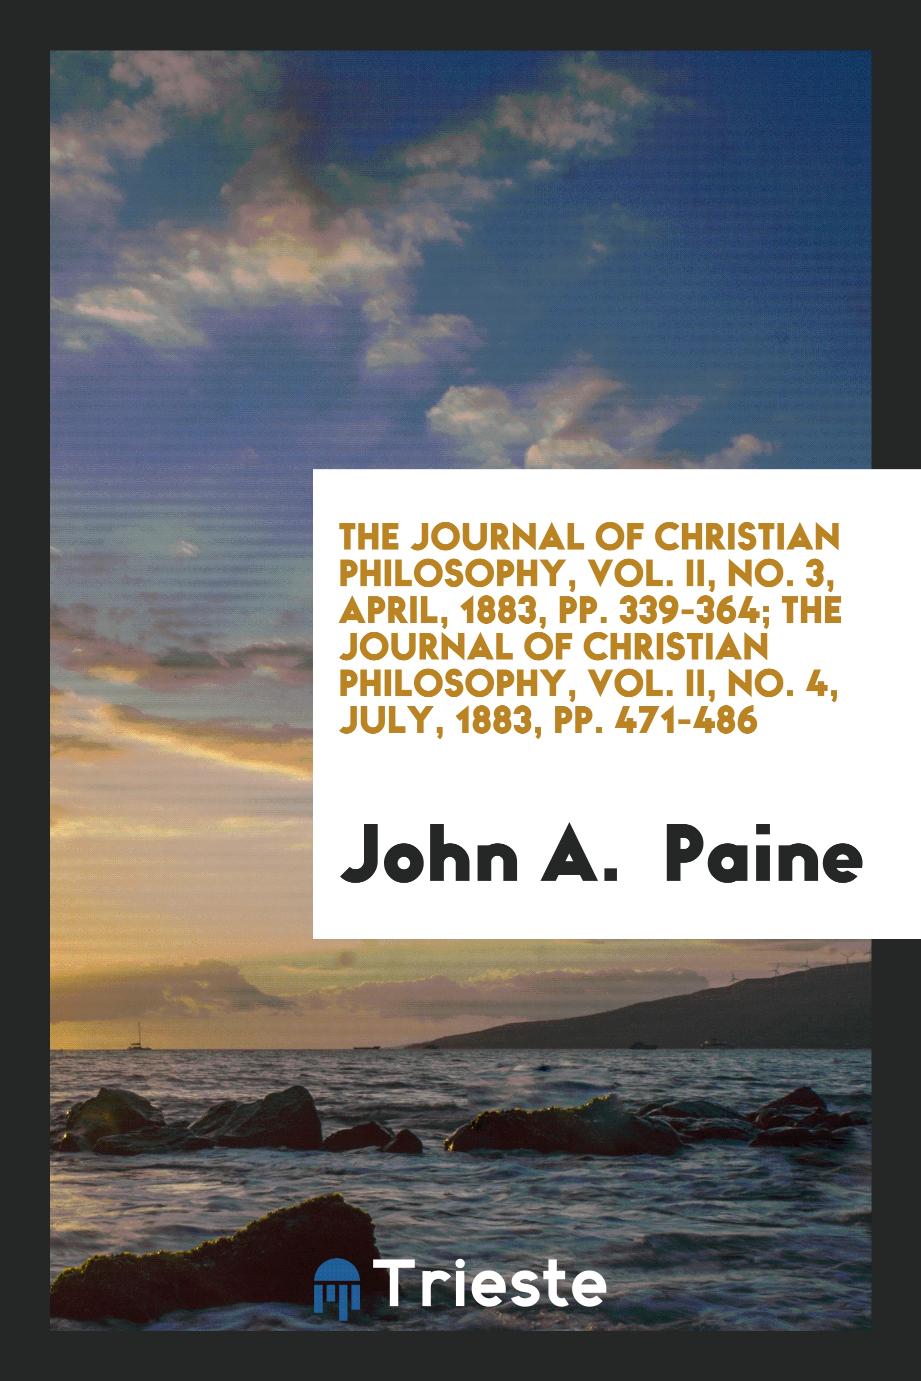 The Journal of Christian Philosophy, Vol. II, No. 3, April, 1883, pp. 339-364; The Journal of Christian Philosophy, Vol. II, No. 4, July, 1883, pp. 471-486